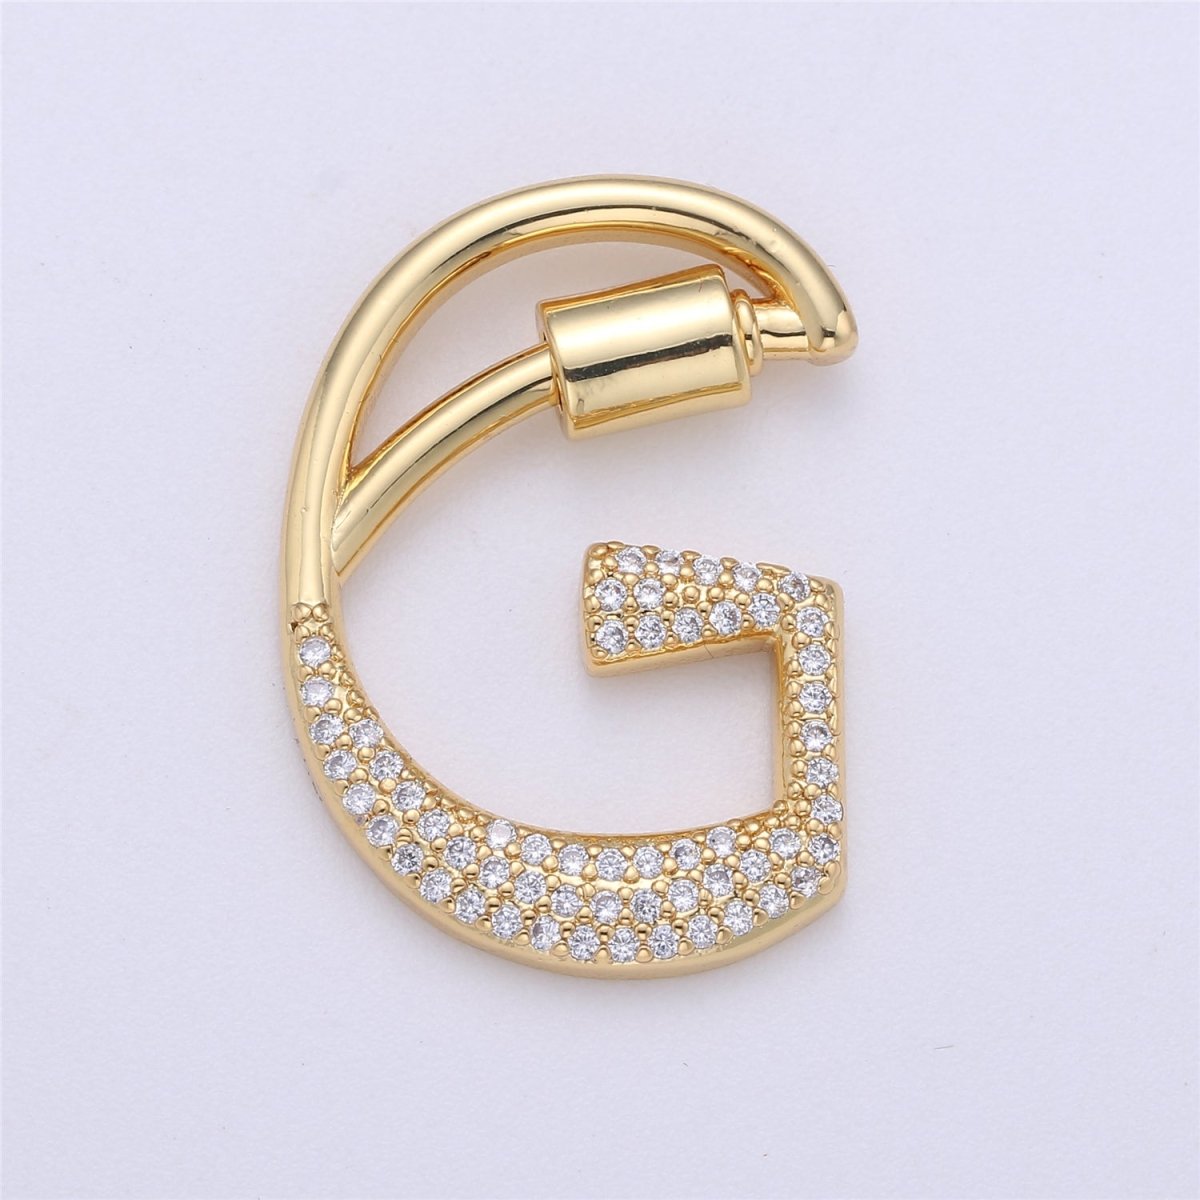 24K Gold-Plated Letter "G" Carabiner with Pave Zirconia Rhinestones, Circle Screw Clasp - DLUXCA